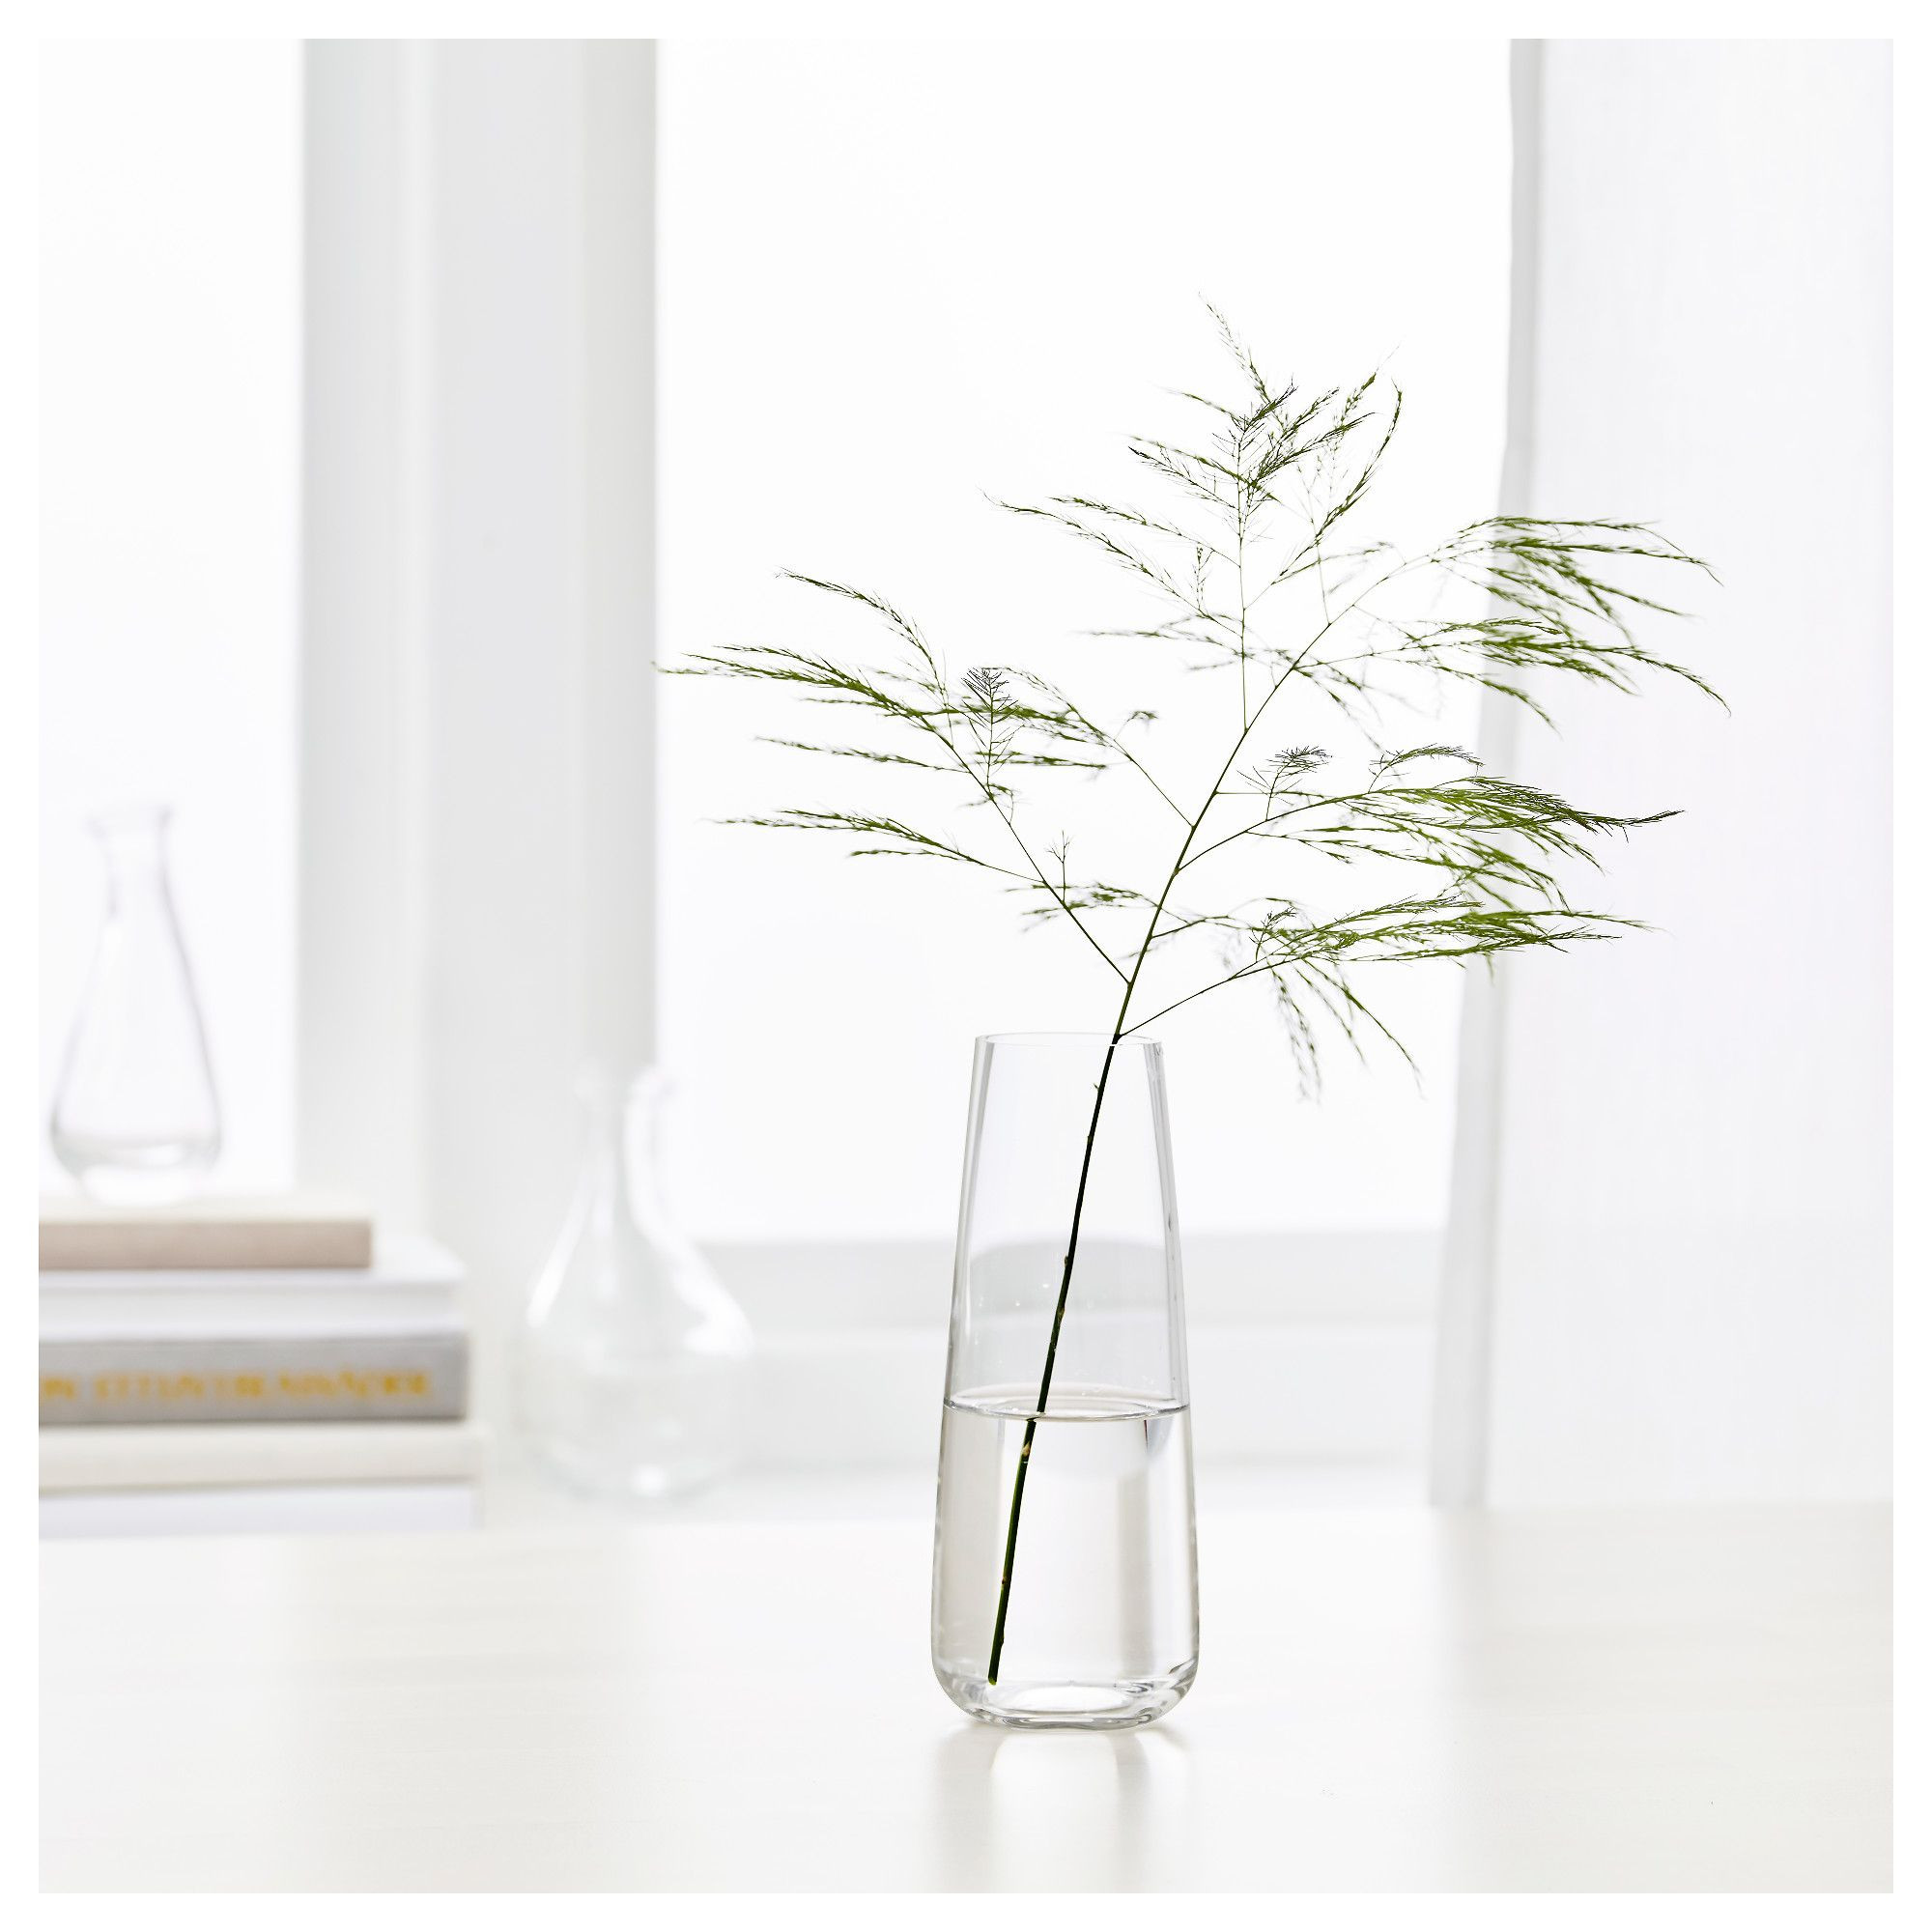 12 Elegant Ikea Glass Vase 2024 free download ikea glass vase of ikea berac284kna vase clear glass cag 60 pinterest within ikea berac284kna vase you can easily make a beautiful floral arrangement with just a single flower or a twig sinc